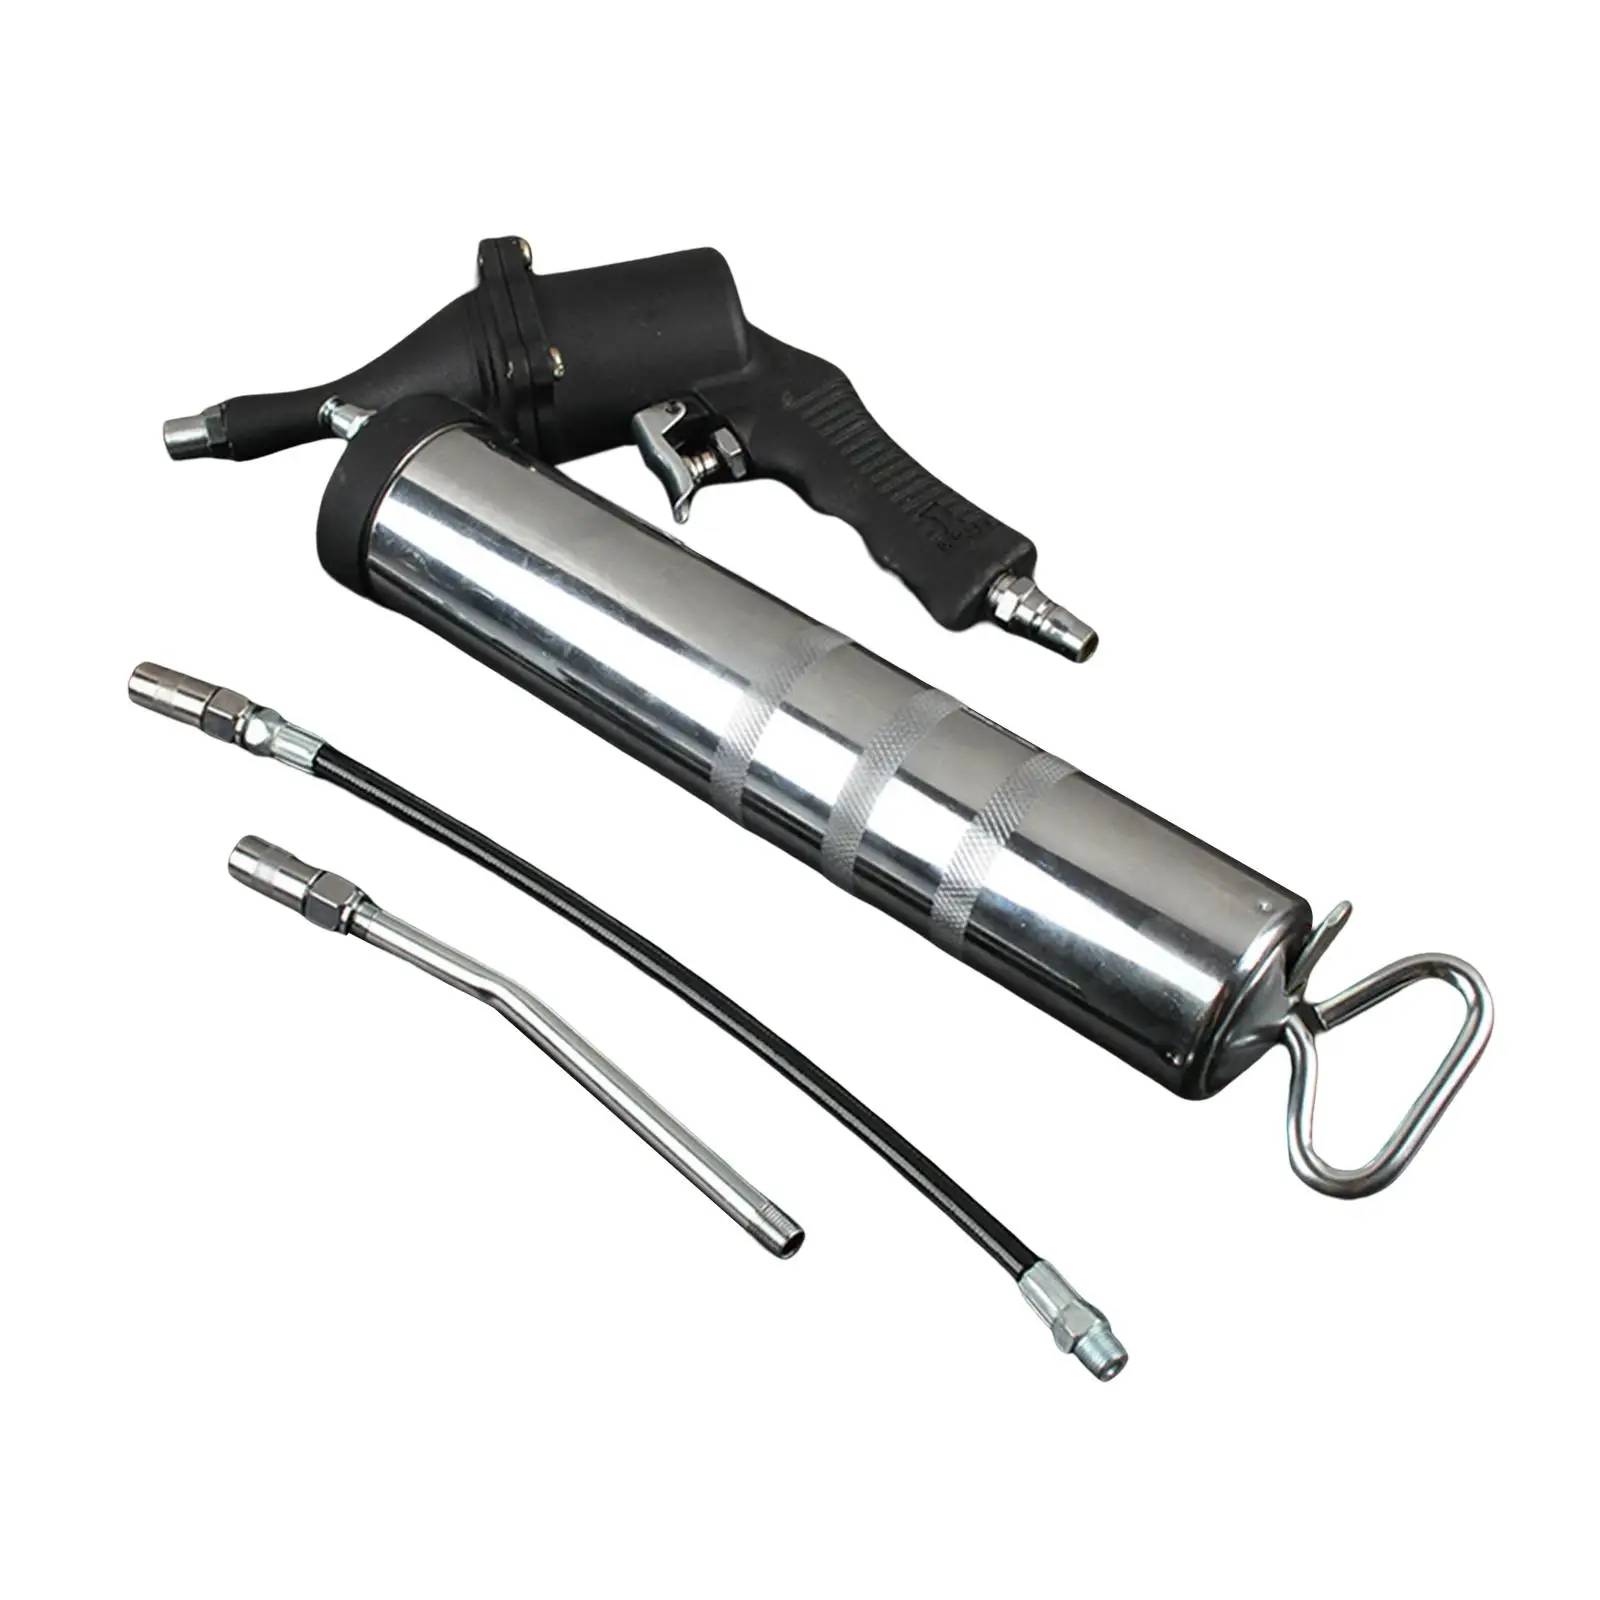 Steel Air Pneumatic Grease Guns Lubrication Tools Hand Operated 400cc Flexible